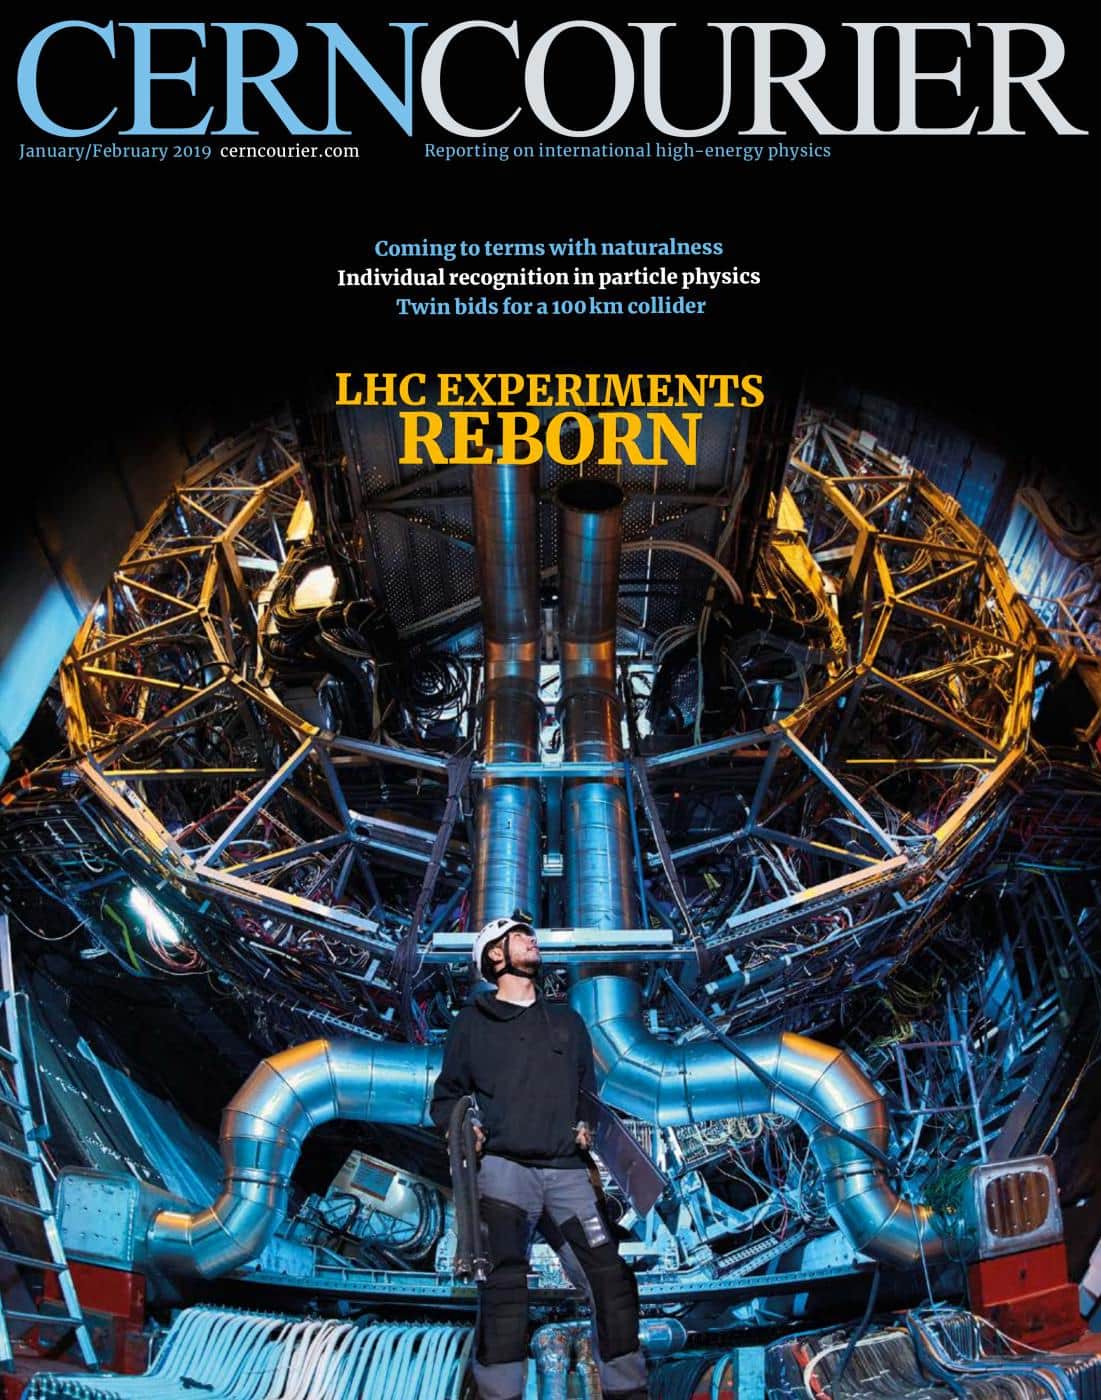 The cover of the January-February 2019 edition of the CERN Courier, showing a person wearing a white hardhat standing in front of a giant piece of scientific equipment with several blueish pipes visible